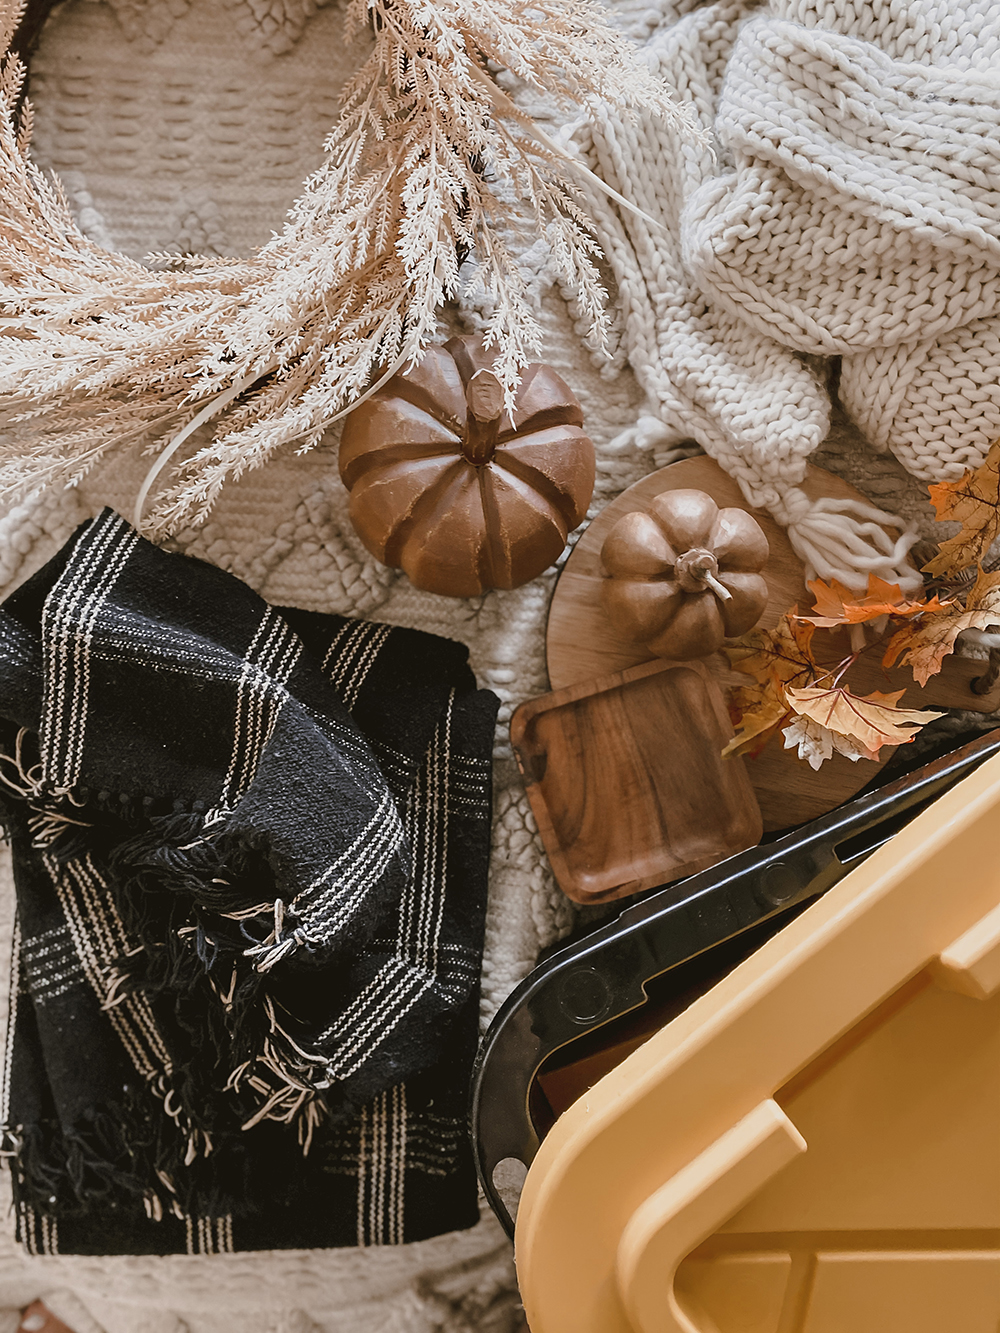 Fall is in the air! On the blog I am sharing all bout how I prepare and organize my home seasonally. With it being the end of August it's all about fall style and wardrobe as well as fall decor to invite the season in. Dive into it all over on KaraLayne.com!